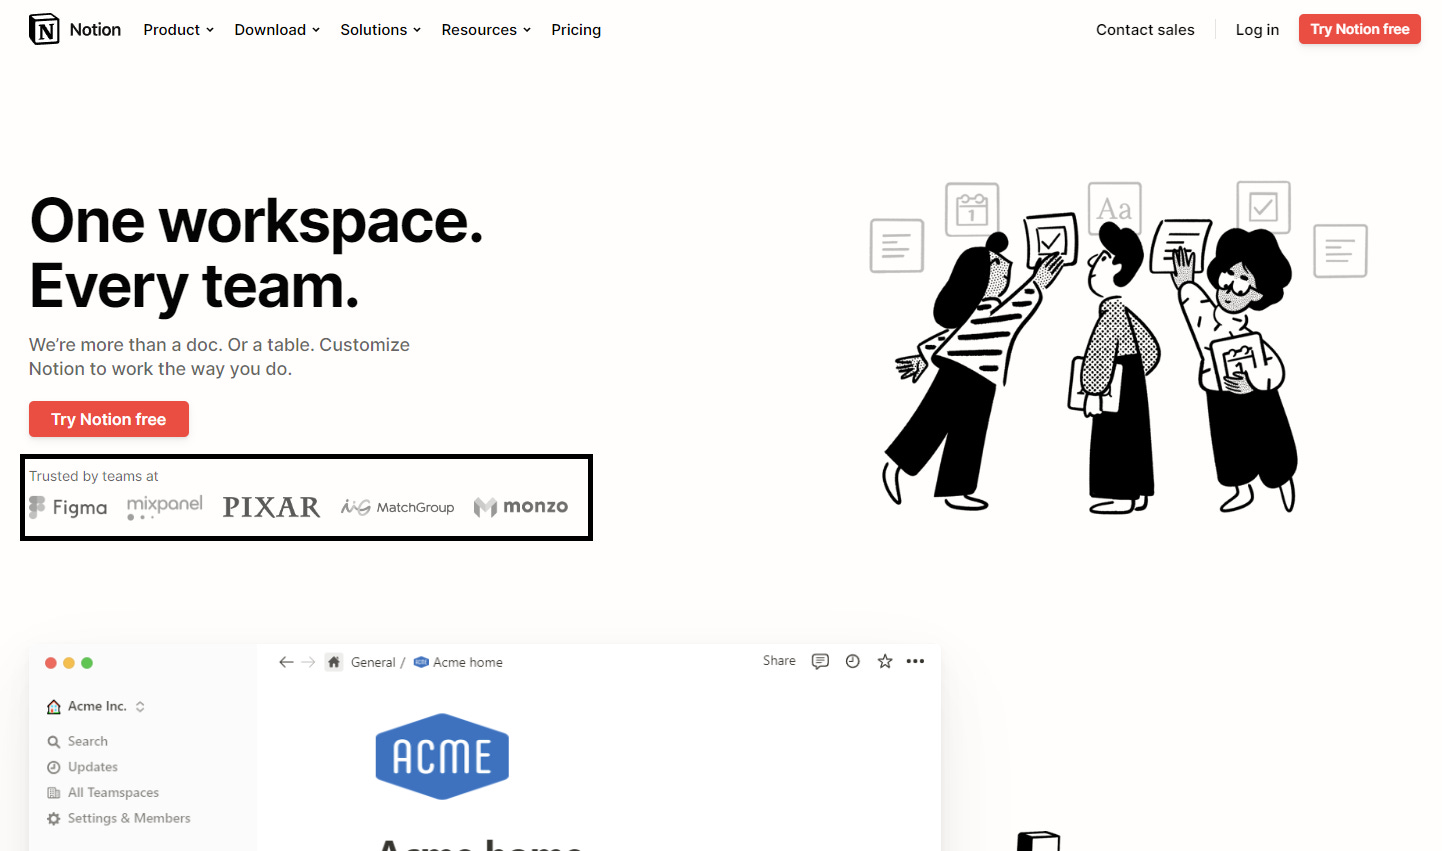 The homepage of notion.com, which has a set of logos immediately underneath their call to action from companies such as “Pixar”.